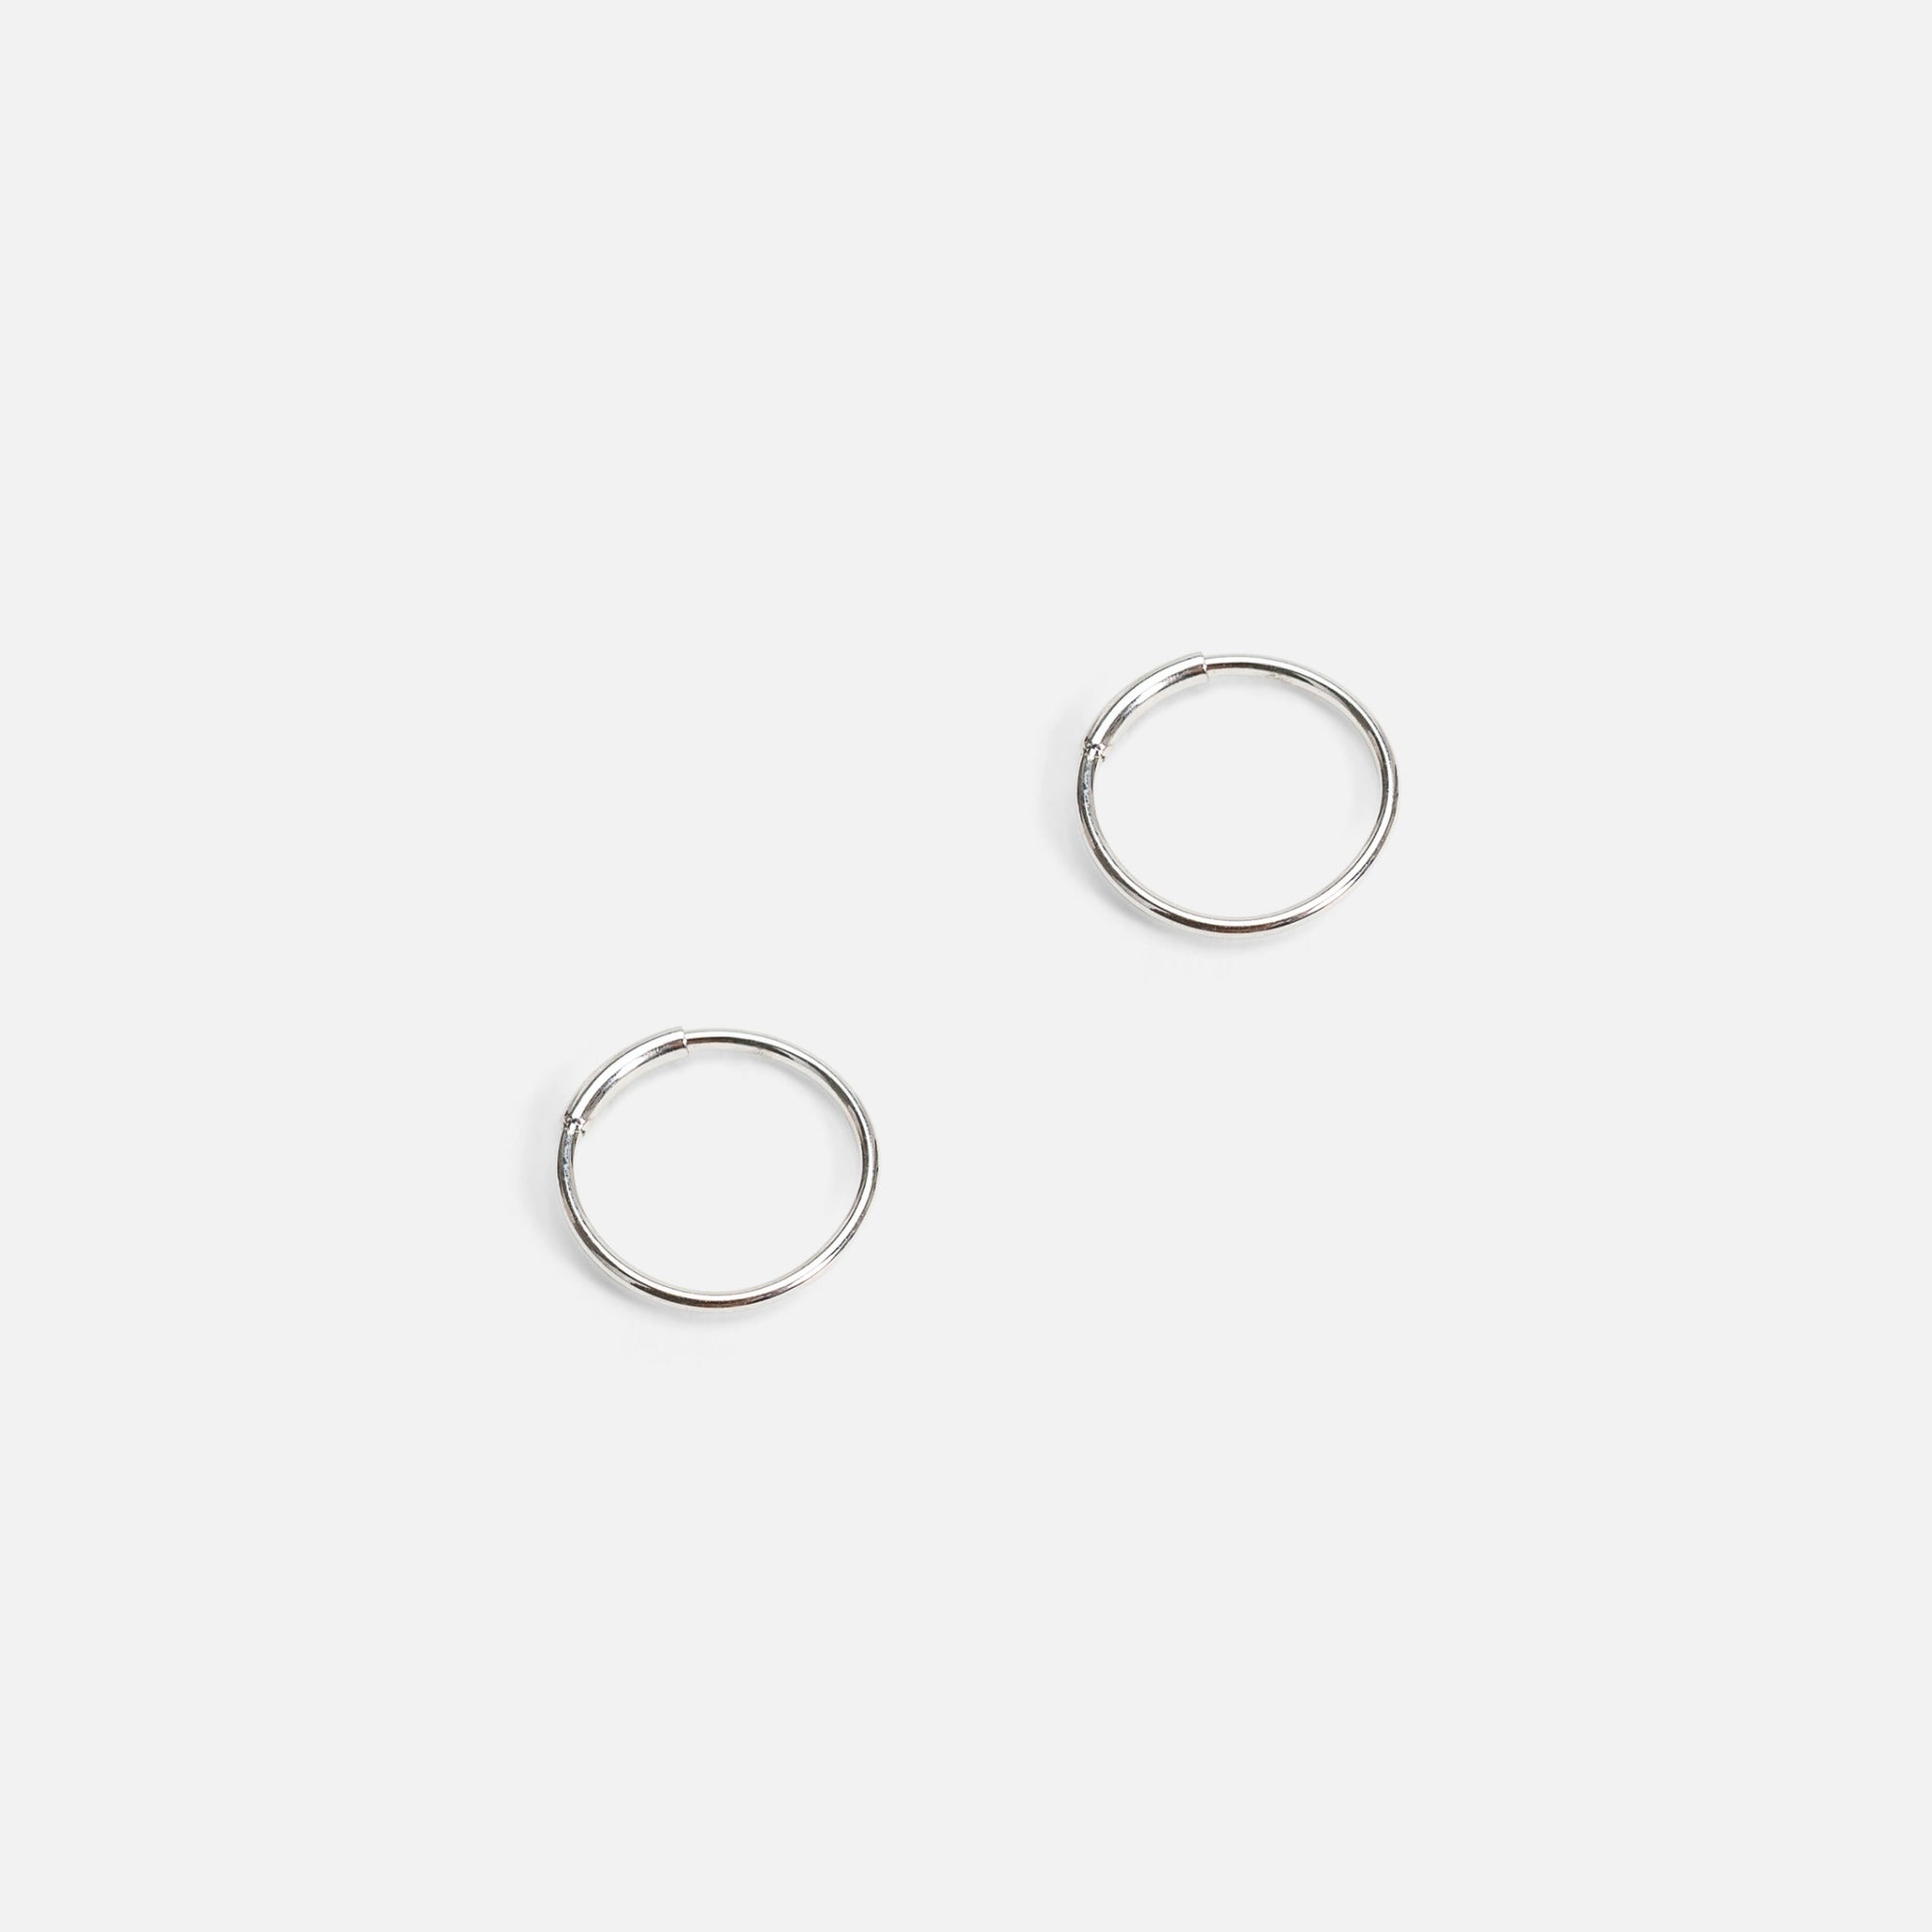 Small silver stainless steel hoops